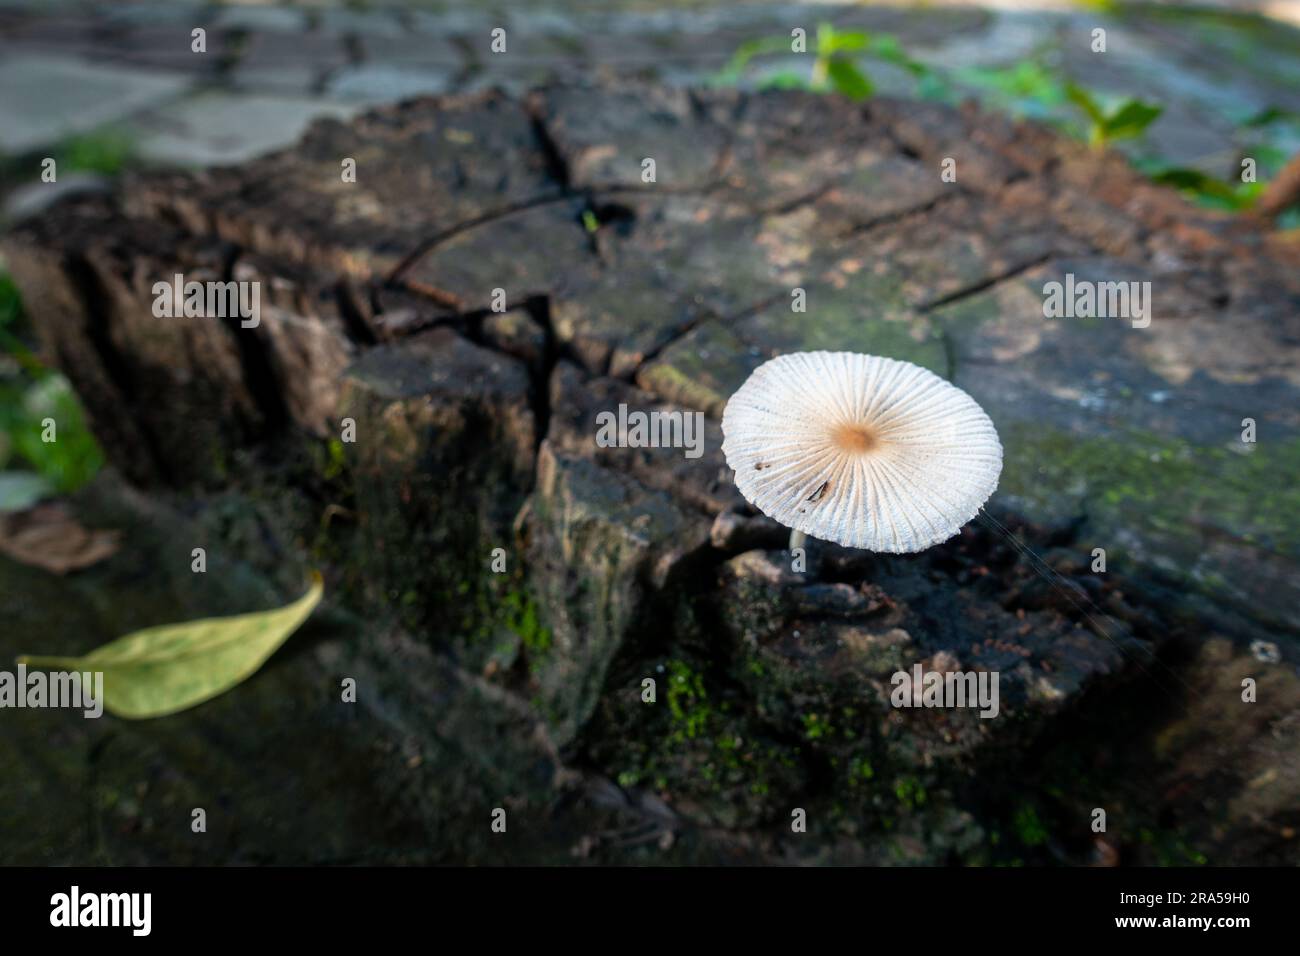 Pleated inkcap Mushroom emerging from a wet humid wooden stump. Parasola plicatilis is a small saprotrophic mushroom with a plicate cap. India Stock Photo